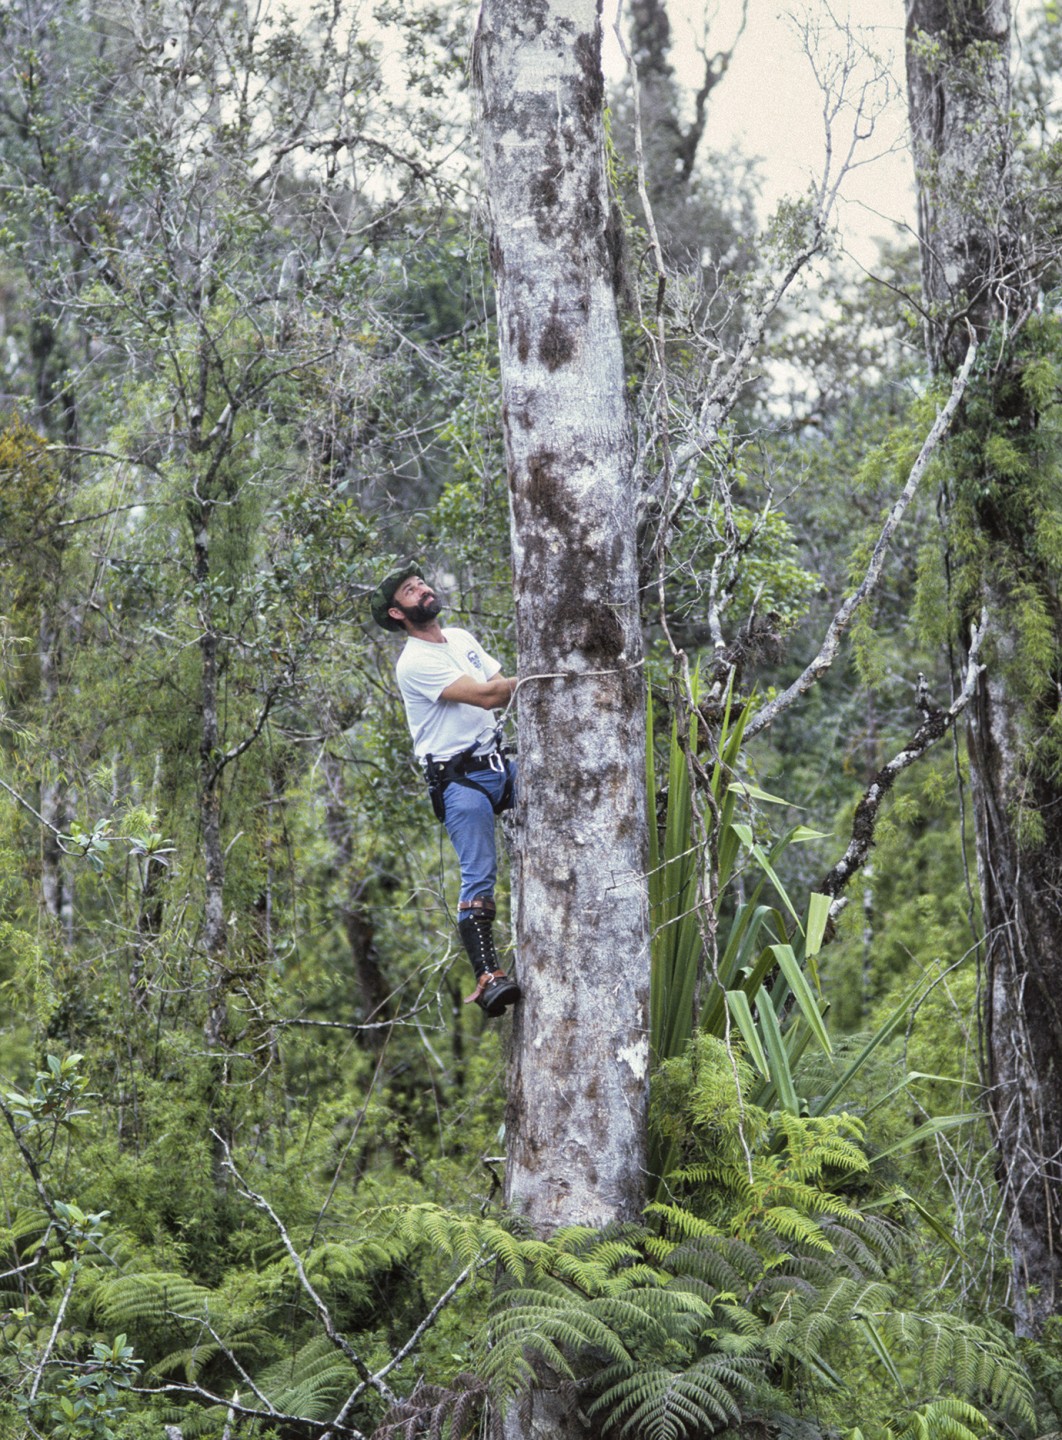 One of the Horticulture Department staff members on the expedition was arborist Daniel Simpson, who brought tree-climbing equipment to reach orchids, ferns, and other epiphytes that would only be found high up in the forest canopy. It was a good thing he had extensive experience—he needed it!